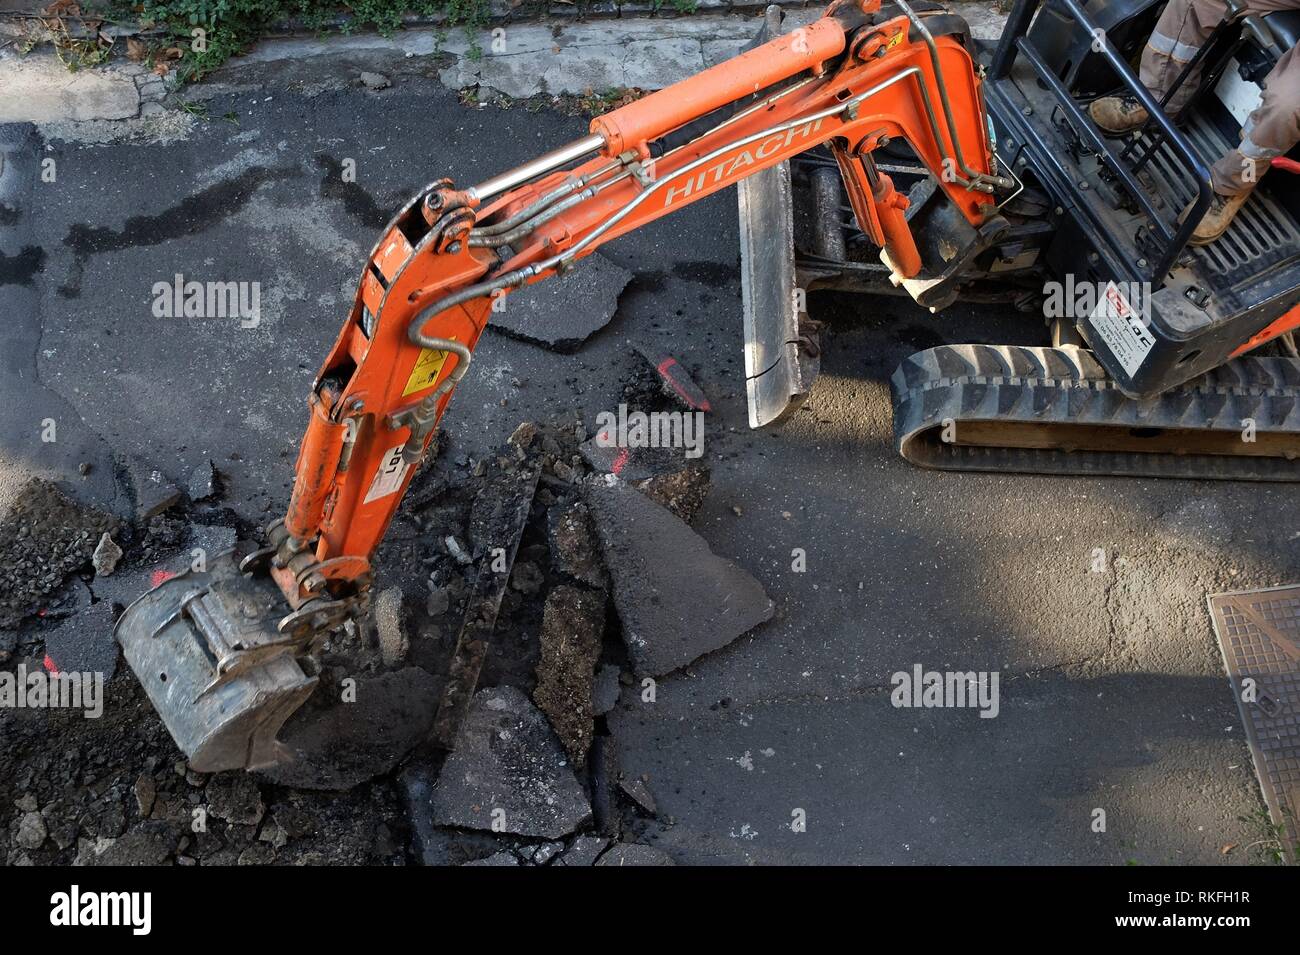 Road workers tear up old asphalt in preparation for repaving - a small street. Pezenas, France Stock Photo